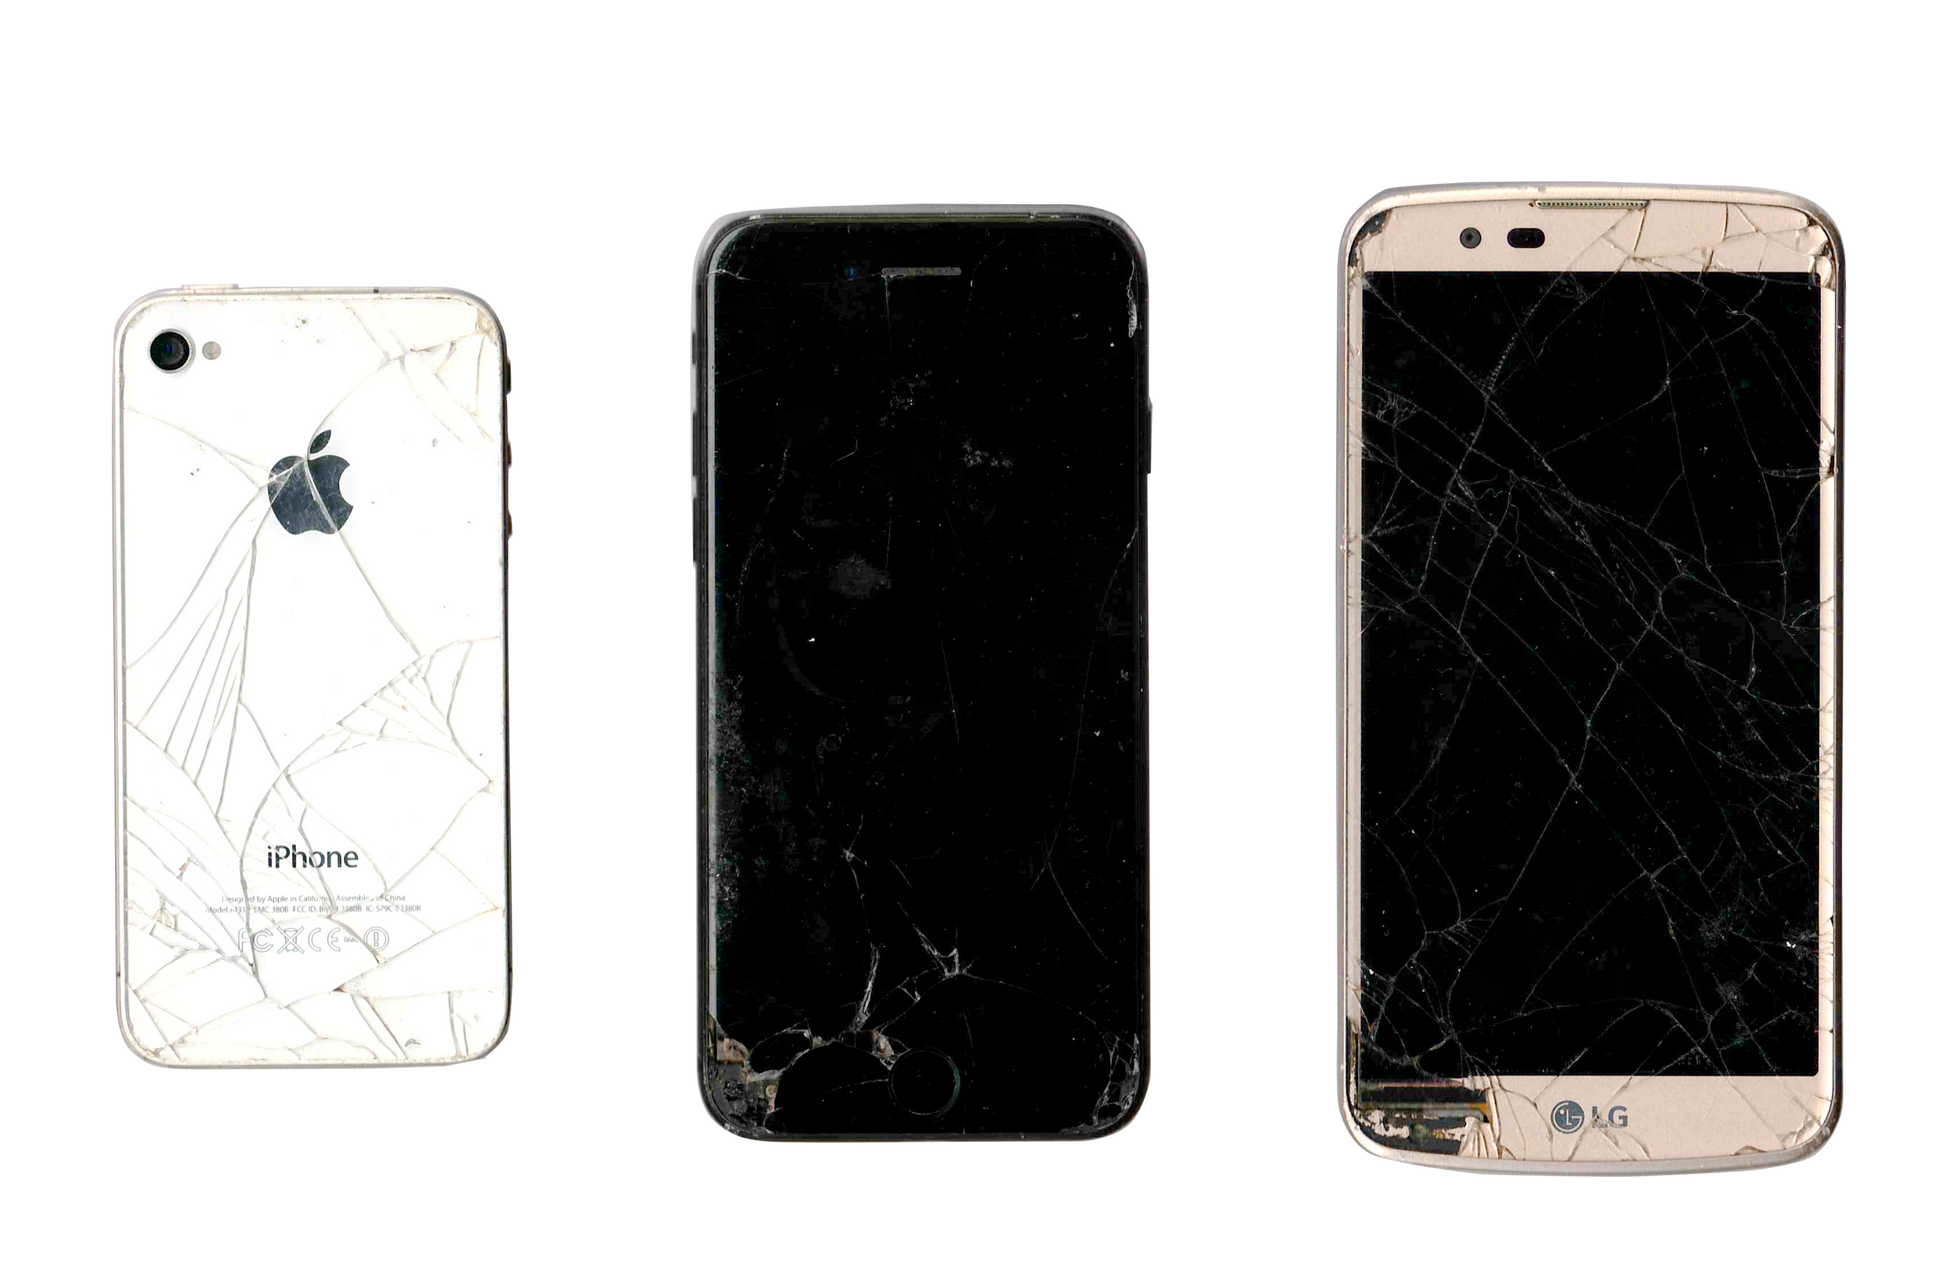 cracked iphone lg samsung metro andriod old iphone cracked overlay asset apple camera front sceen